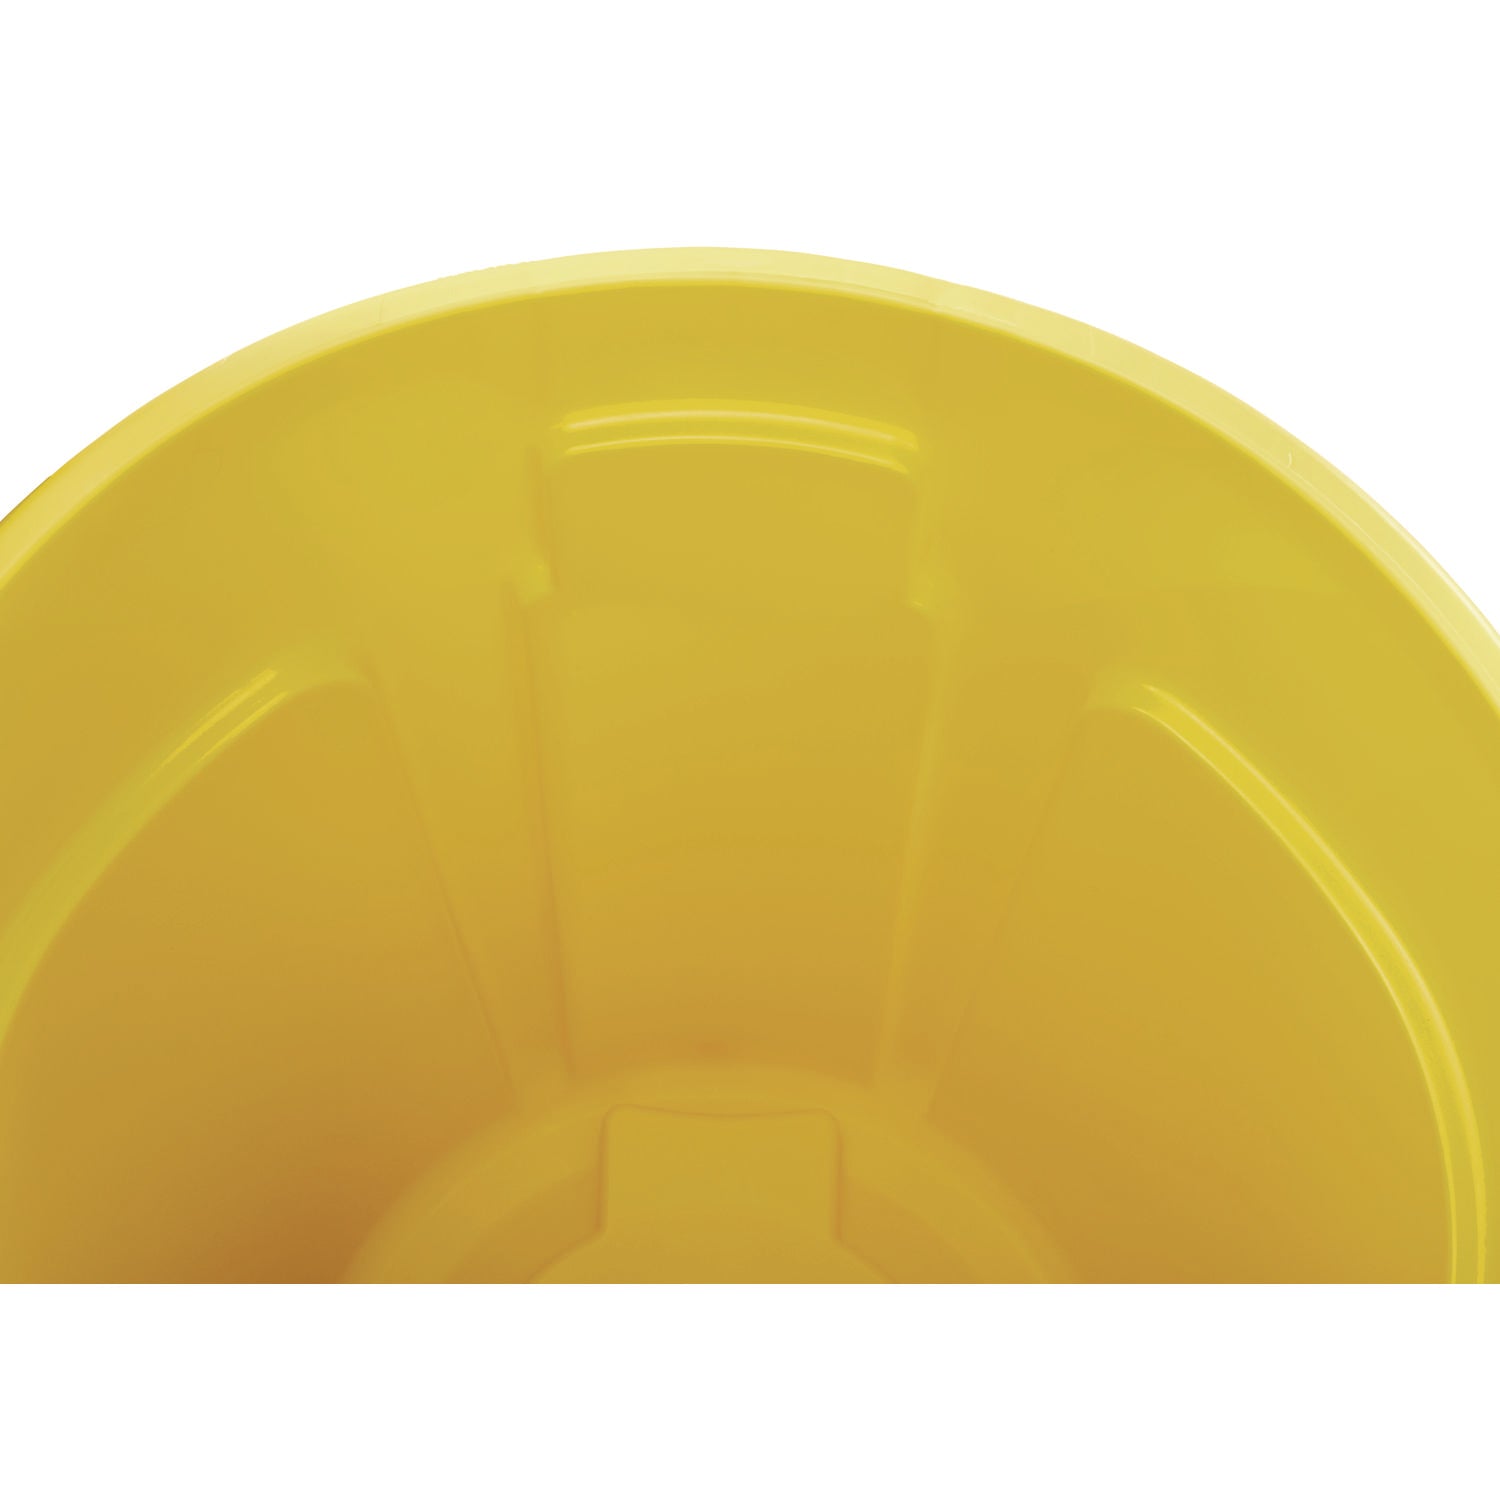 Vented Round Brute Container, 20 gal, Plastic, Yellow - 